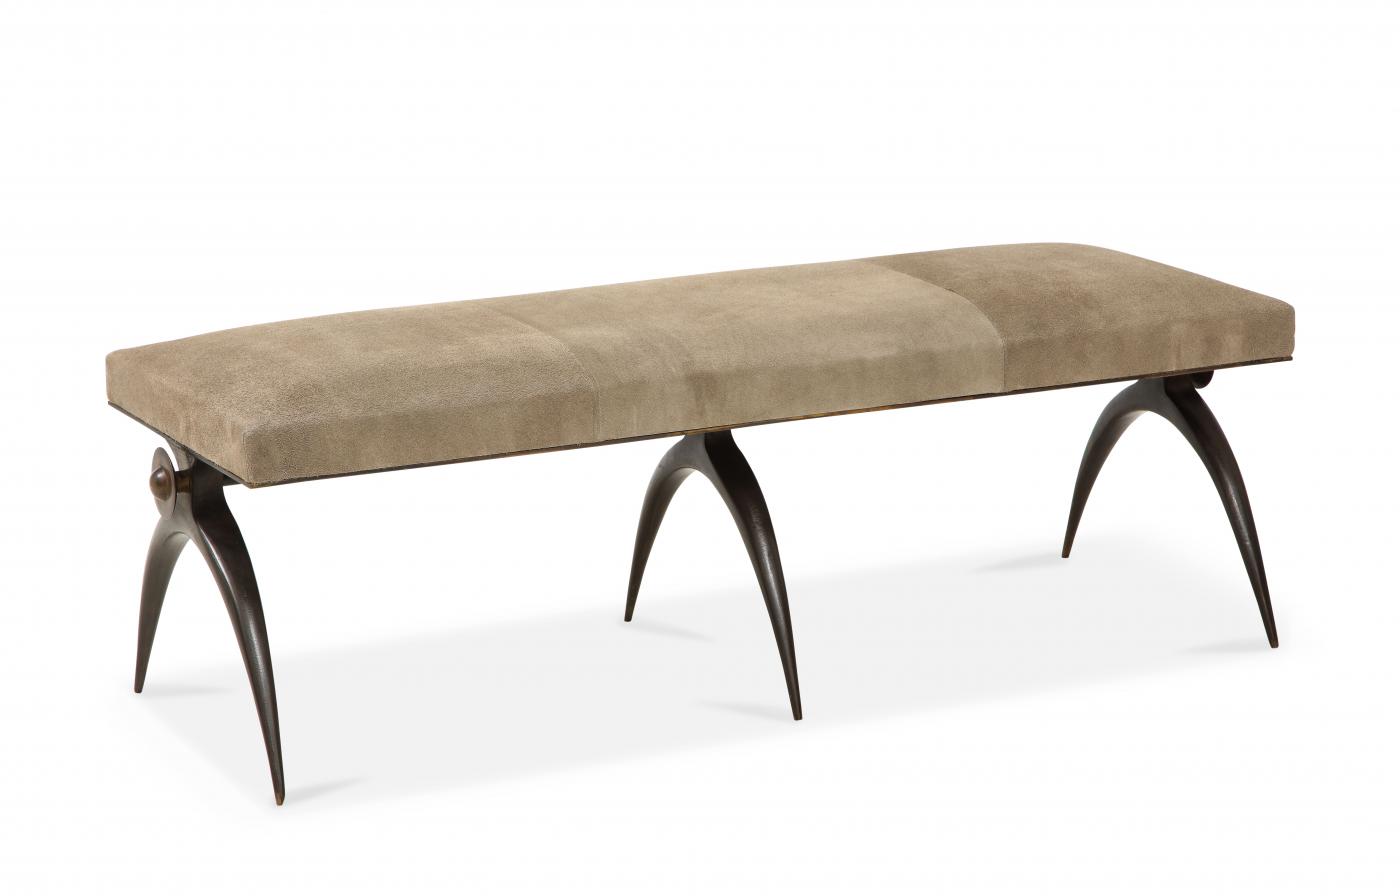 A Contemporary Banquette, designed by Marie Guerin. Solid Bronze